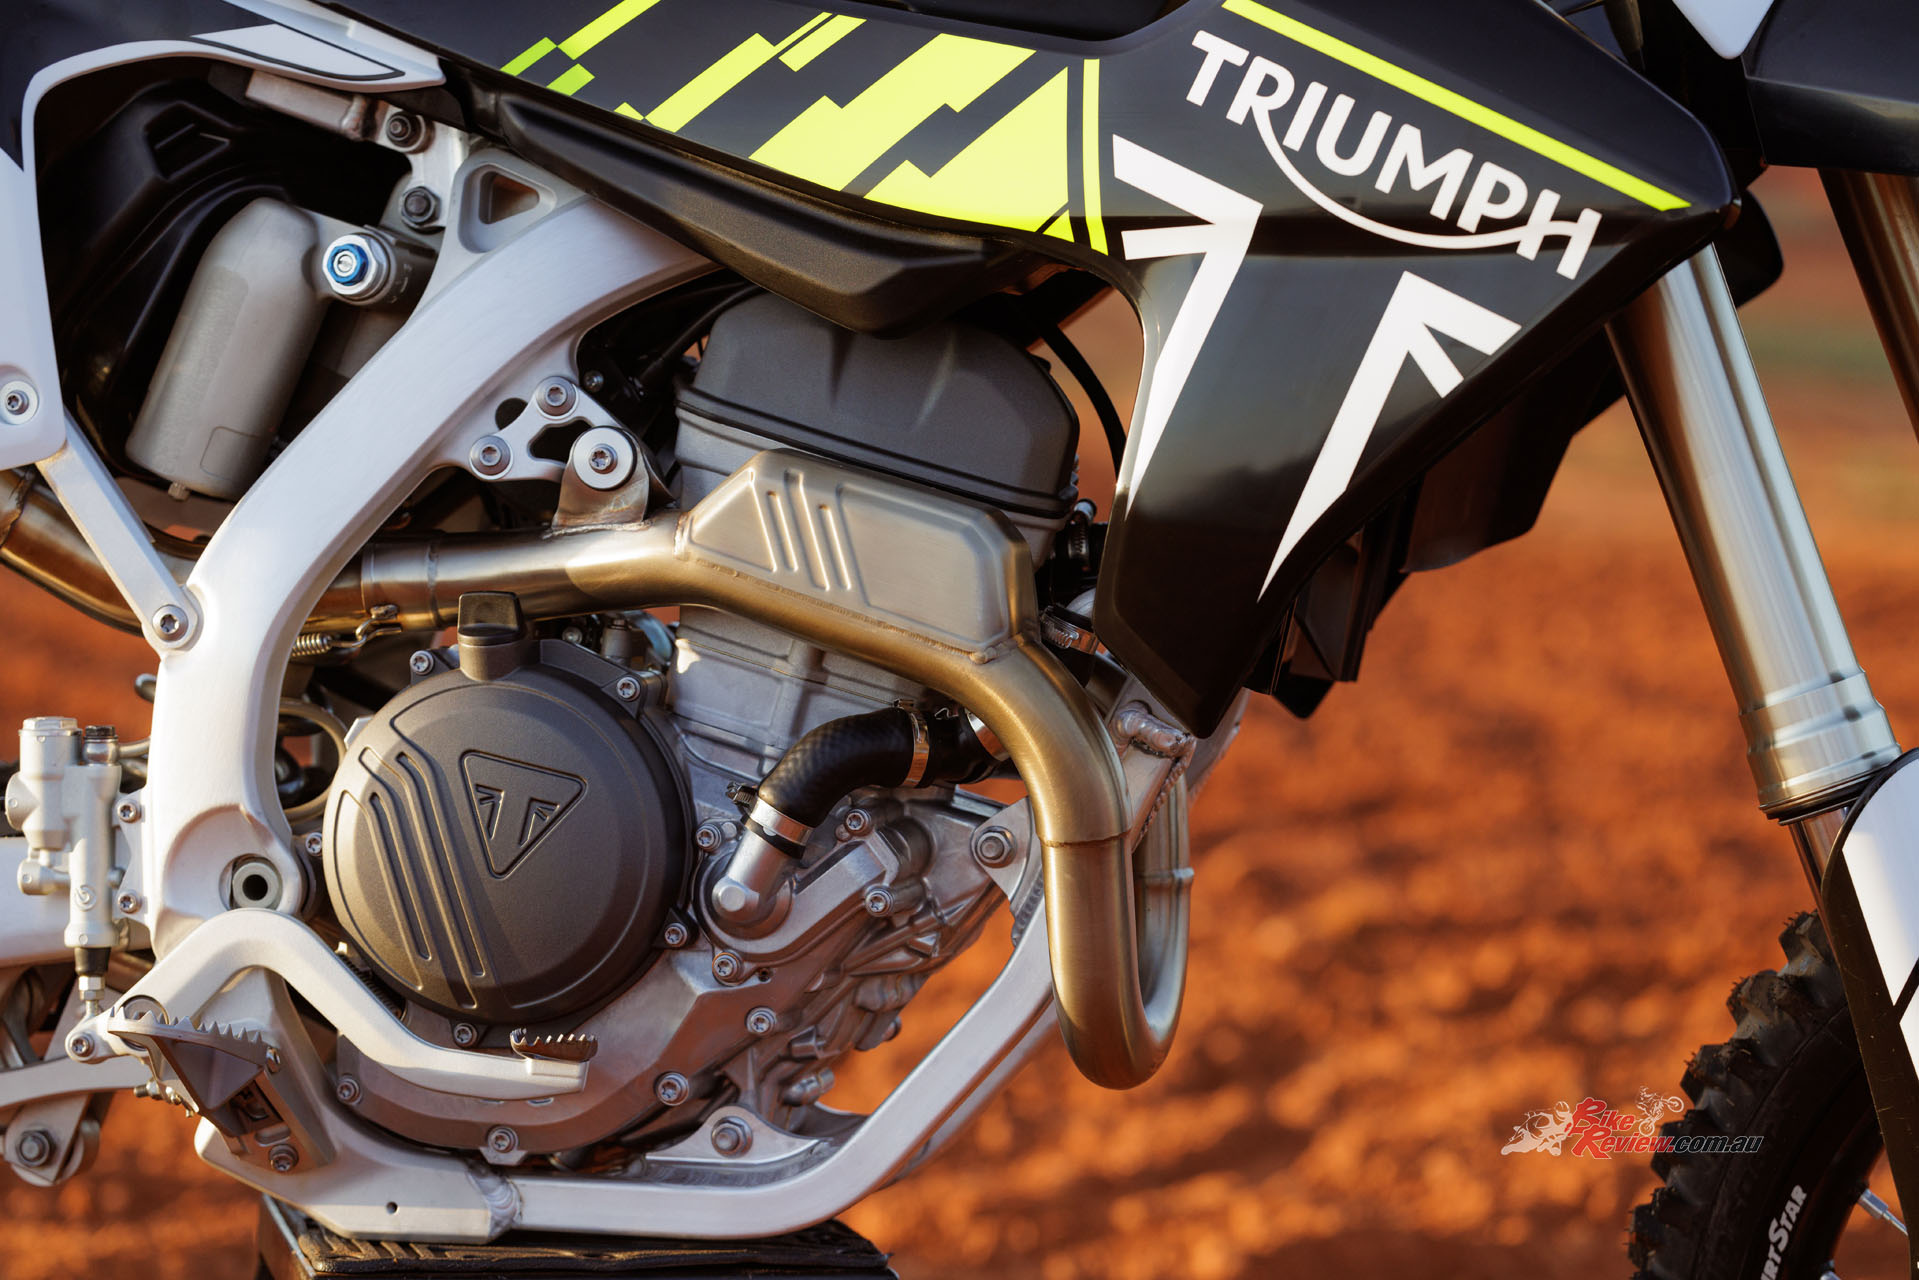 Triumph has developed an all-new performance racing powertrain – a competition four-stroke single, that is ultra-compact and super-light.